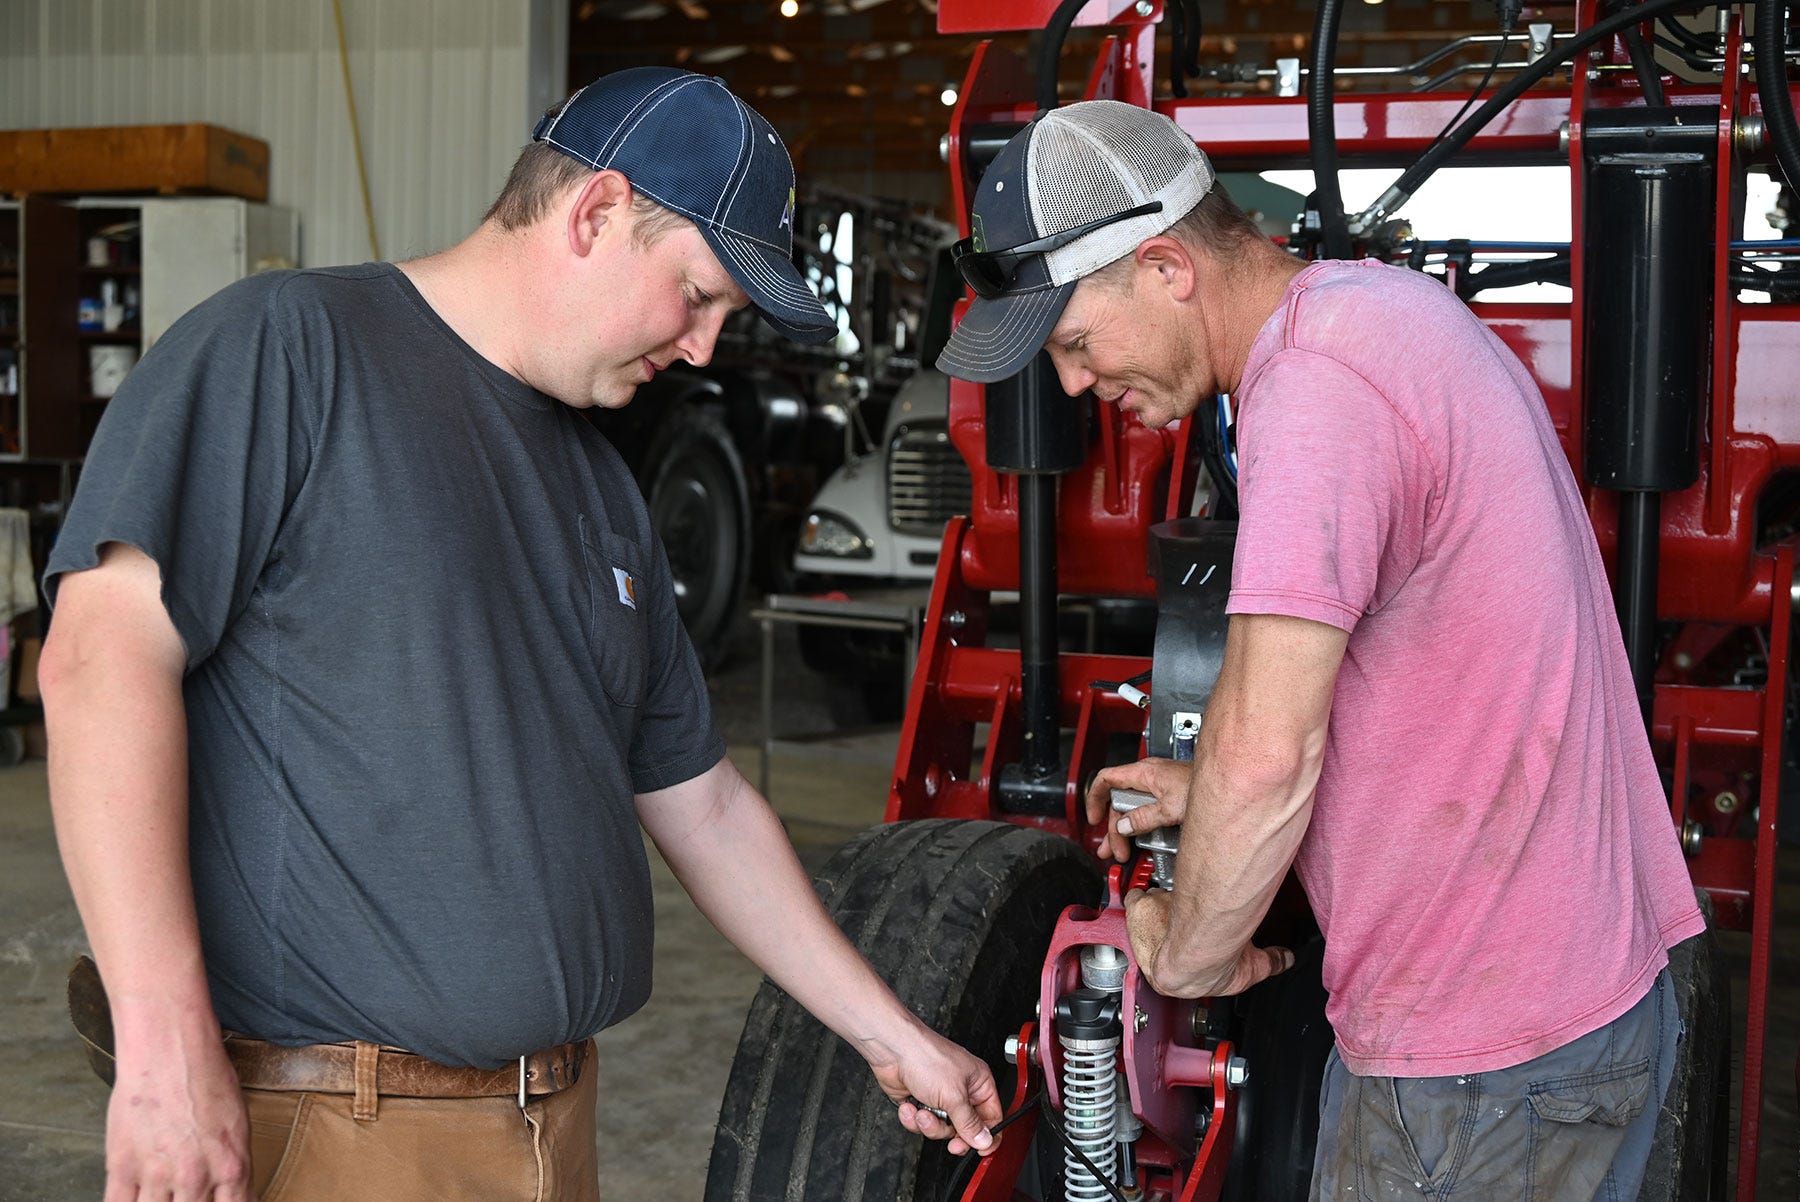 Brothers Carter and Brent Morgan work on farm machinery